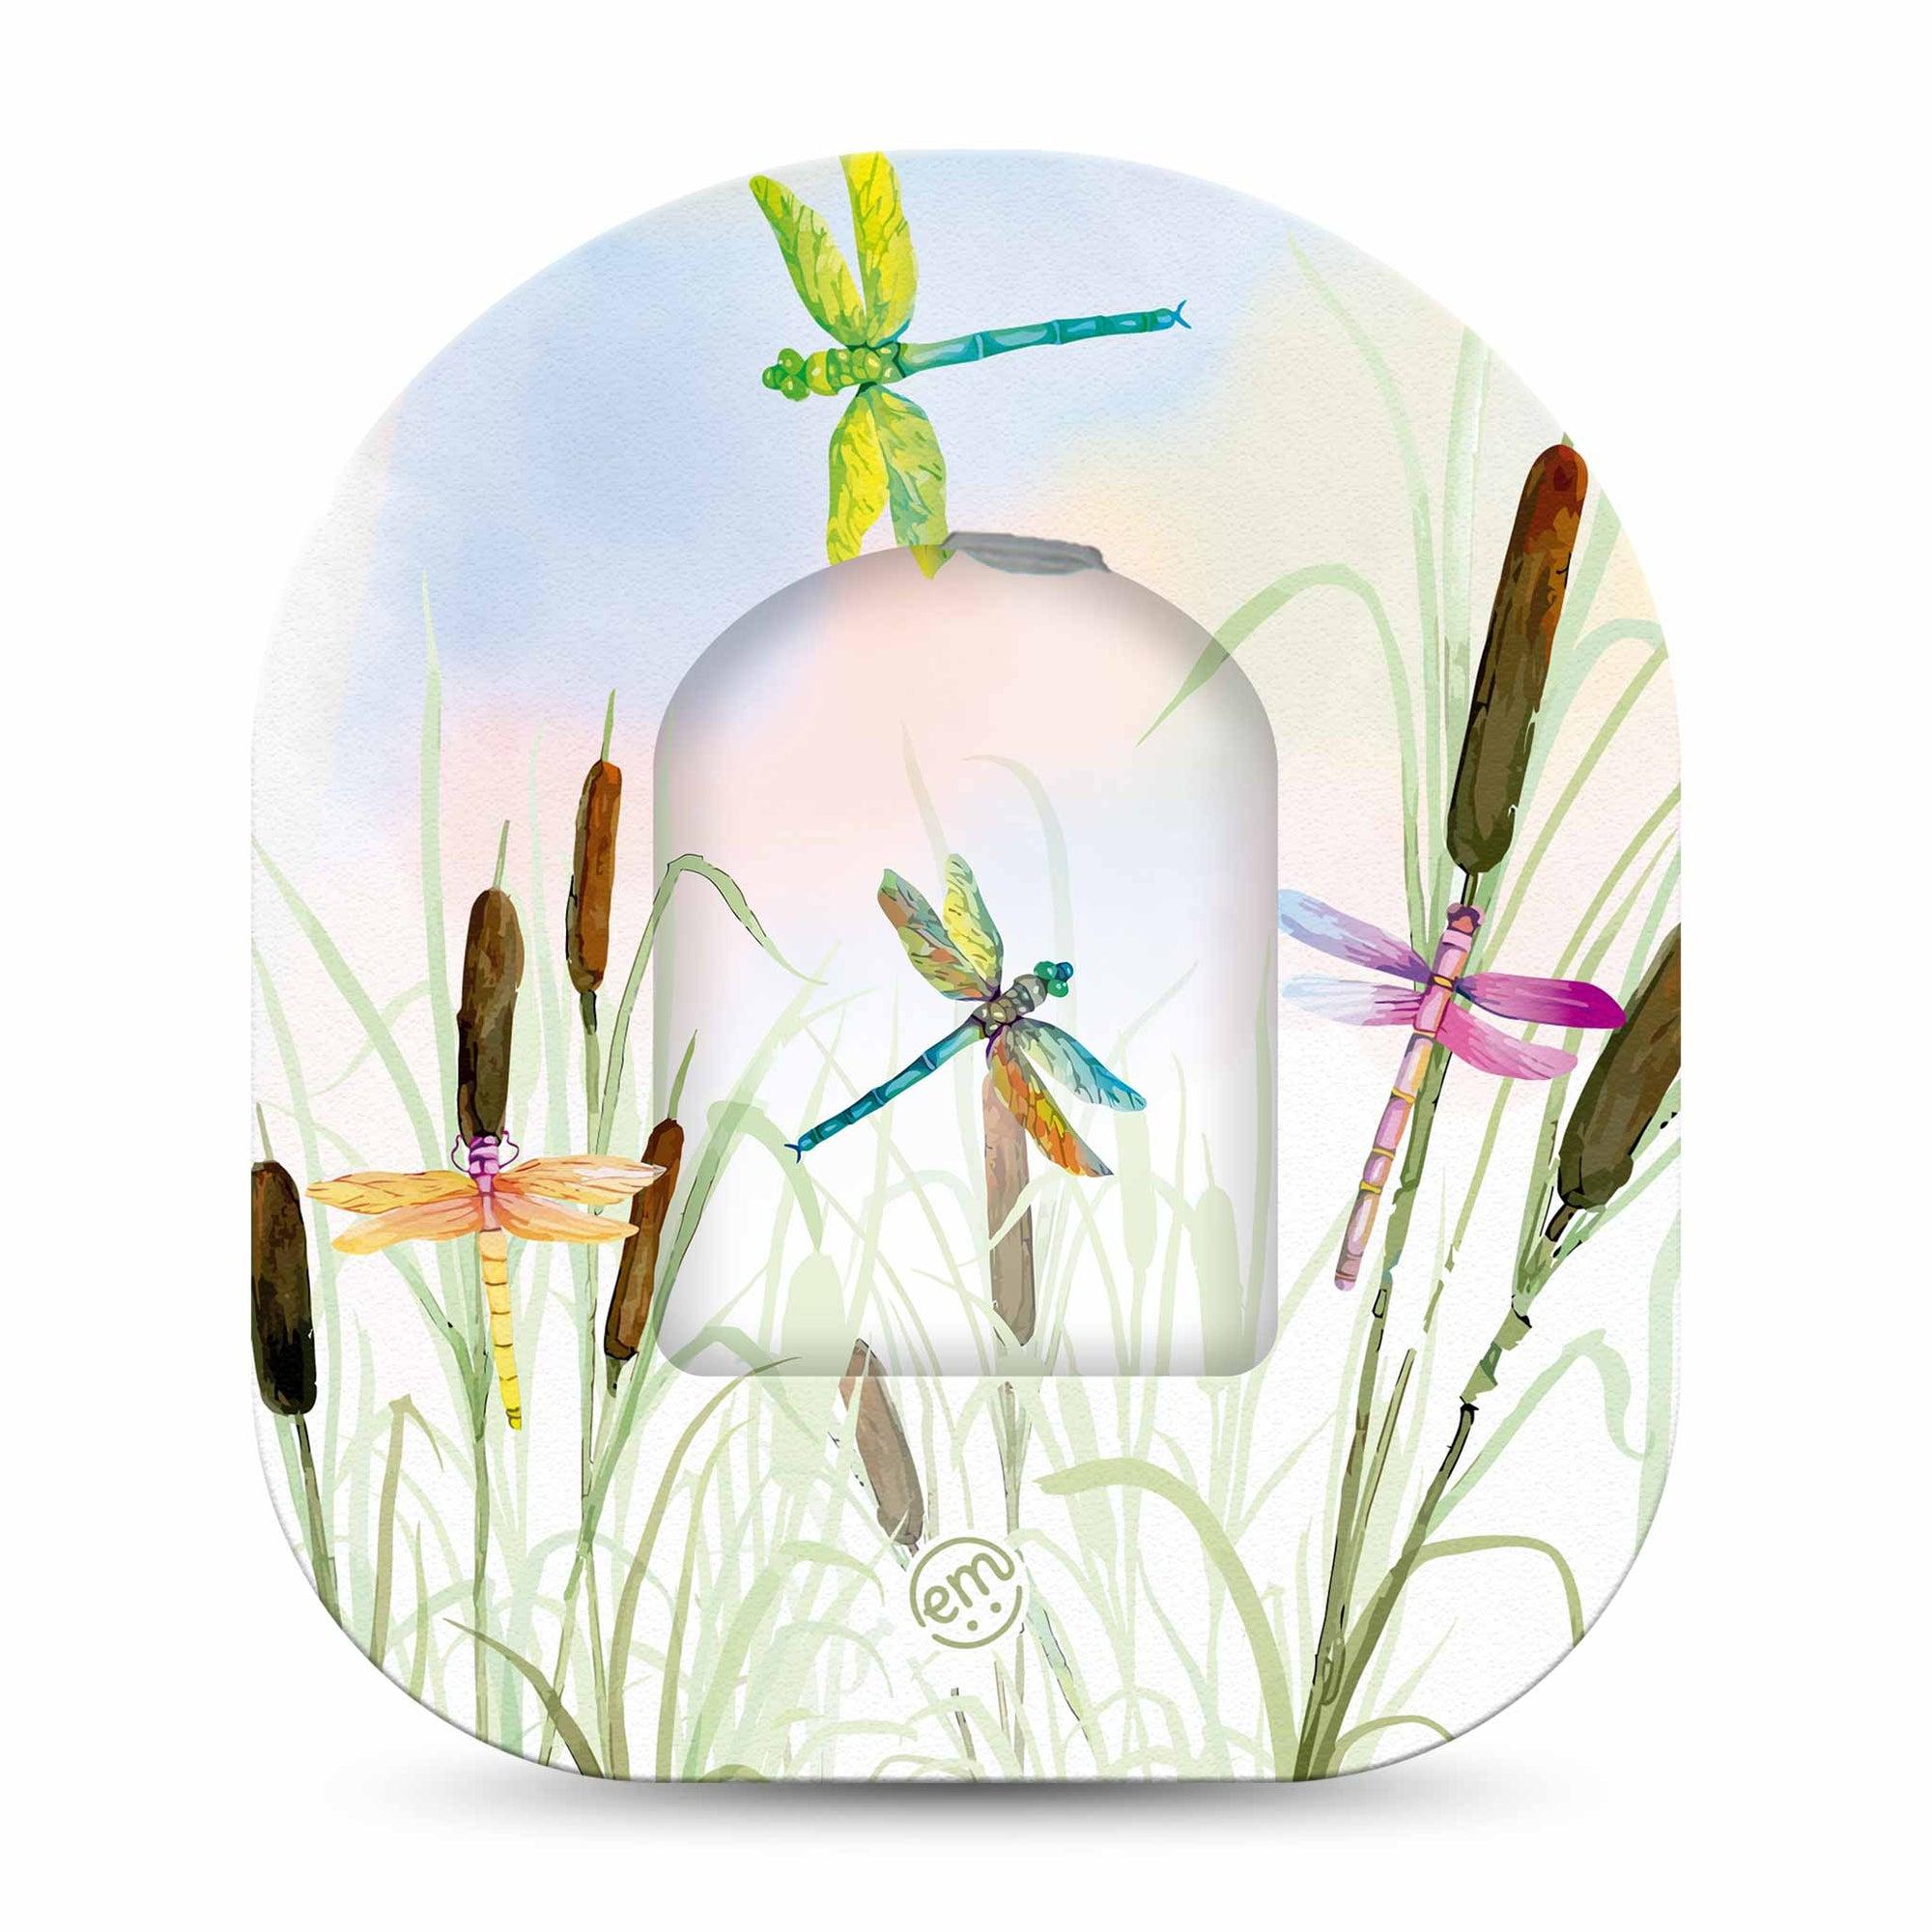 ExpressionMed Dragonfly Pod Center Sticker with Matching Tape Single Sticker Soft Palette Insects Vinyl Pump Design